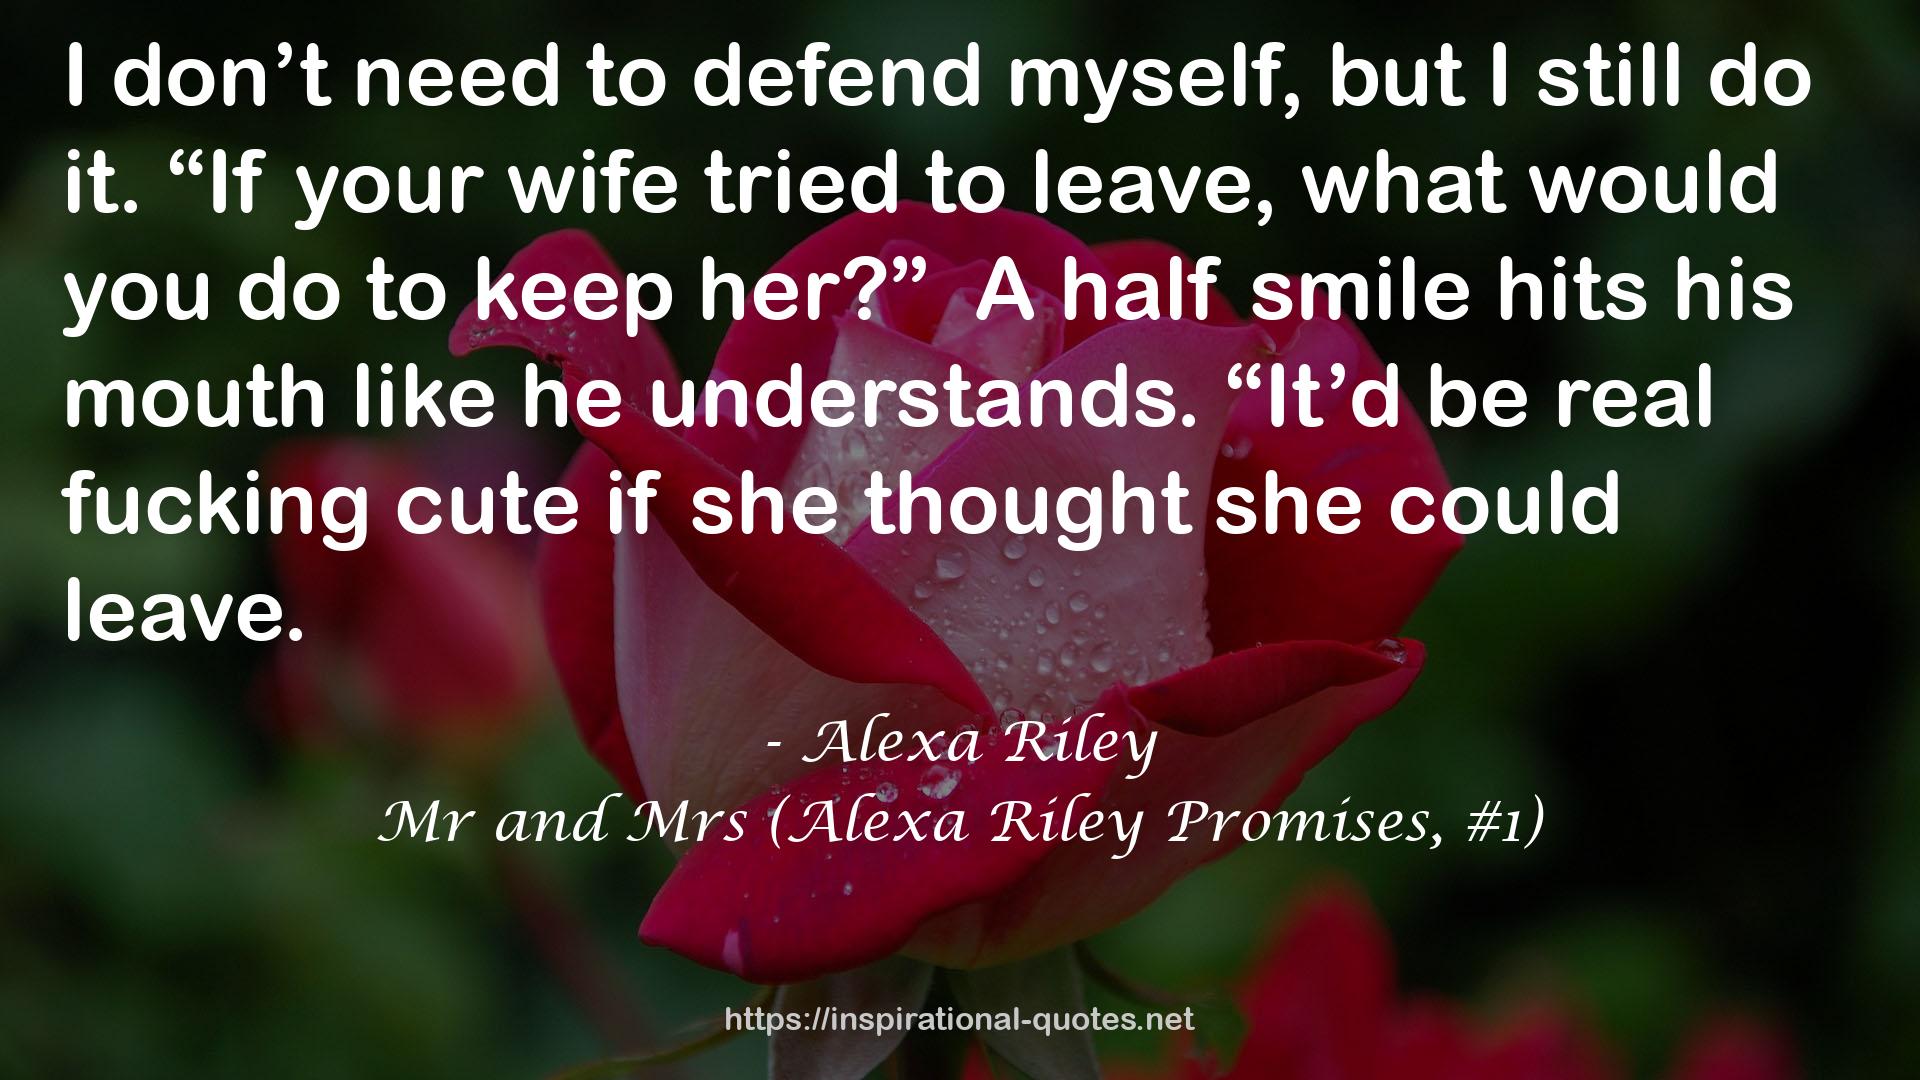 Mr and Mrs (Alexa Riley Promises, #1) QUOTES